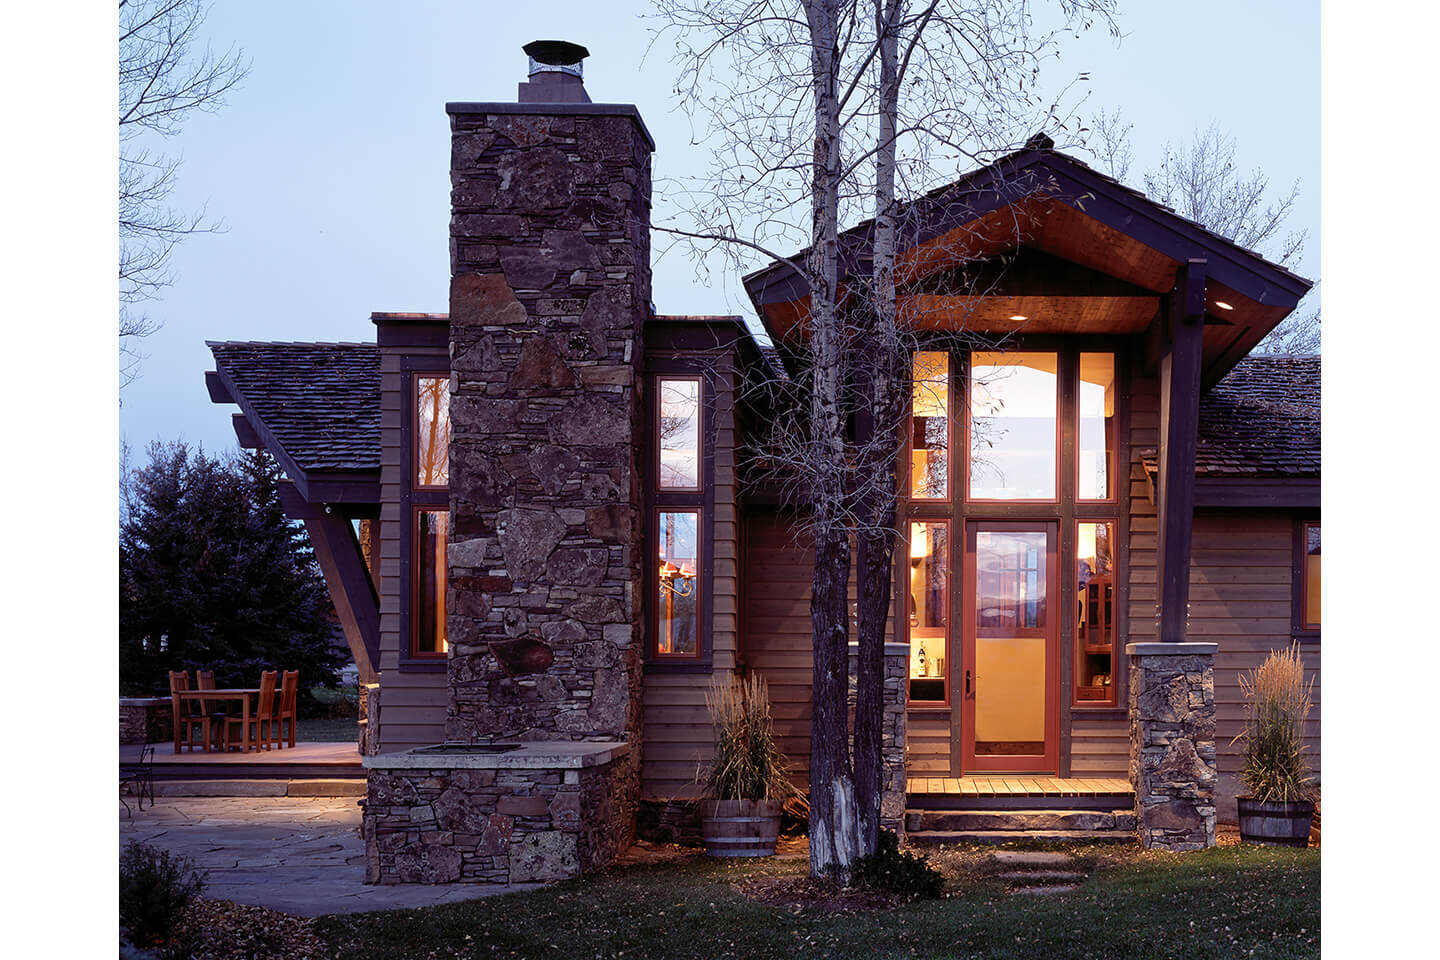 Twilight view of residence with chimney